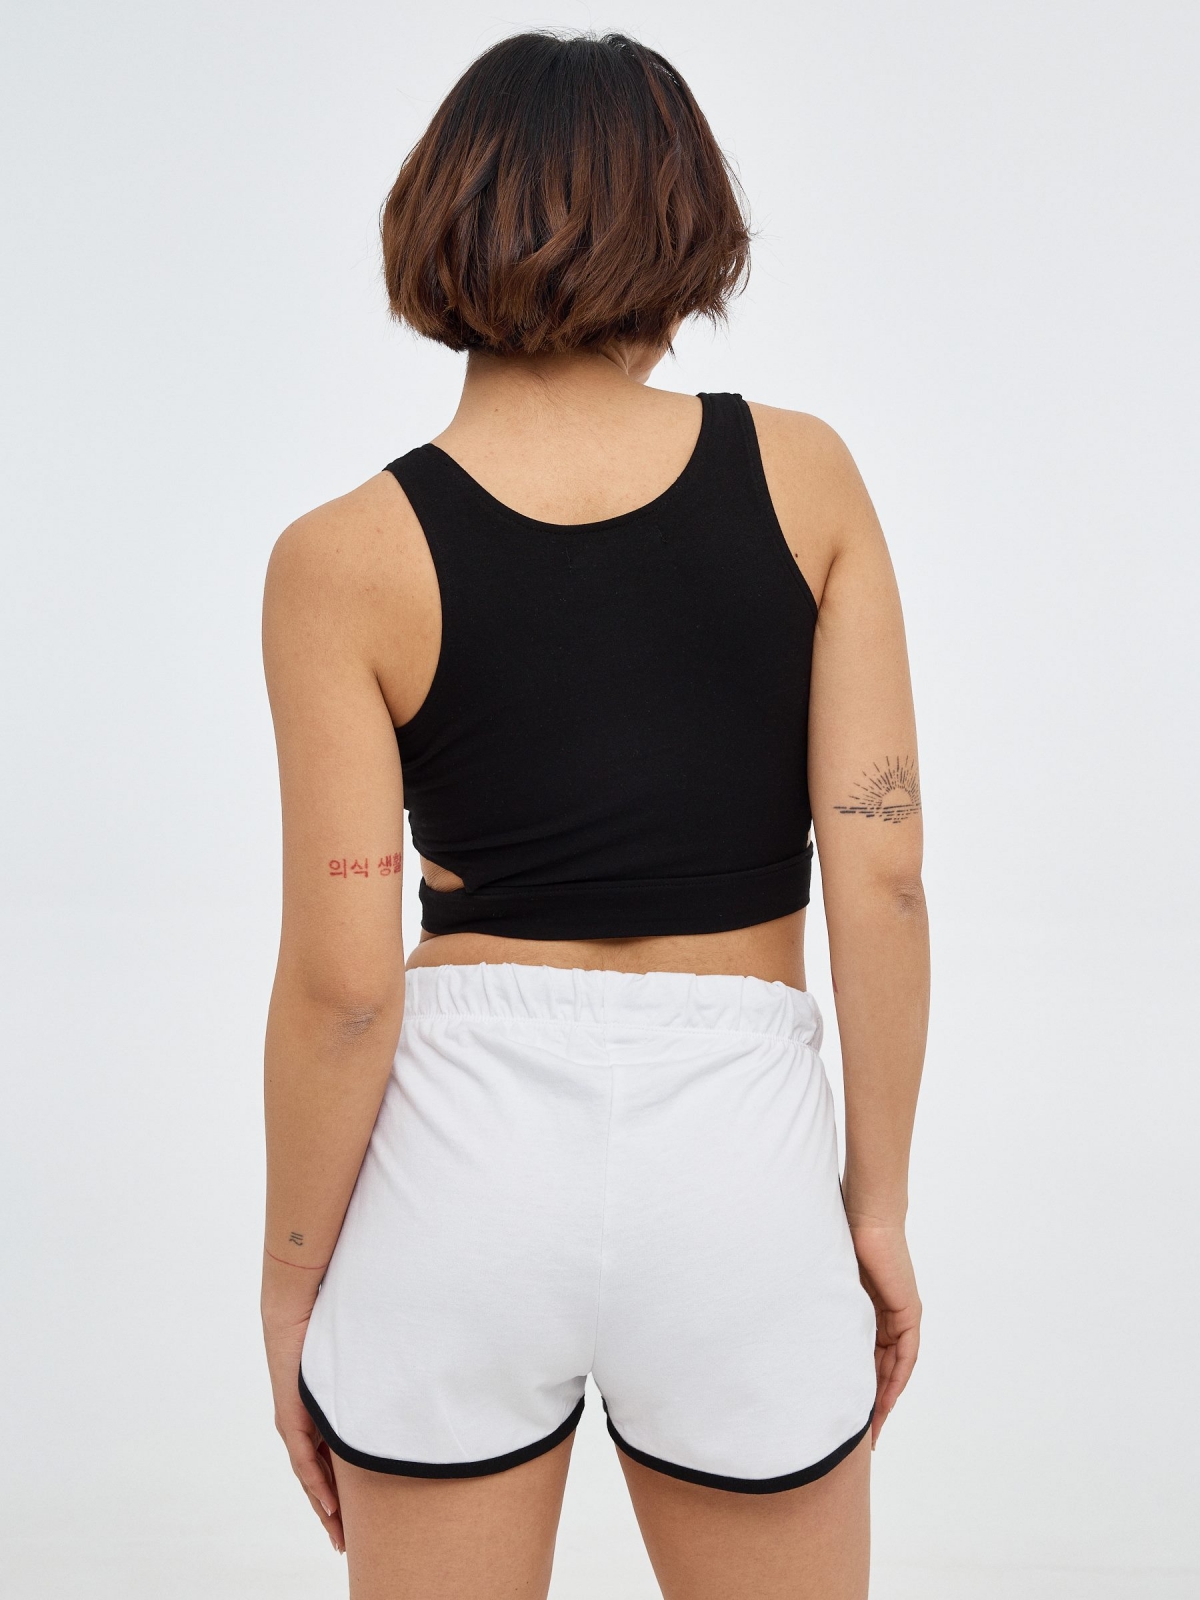 Contrast trim shorts white middle back view